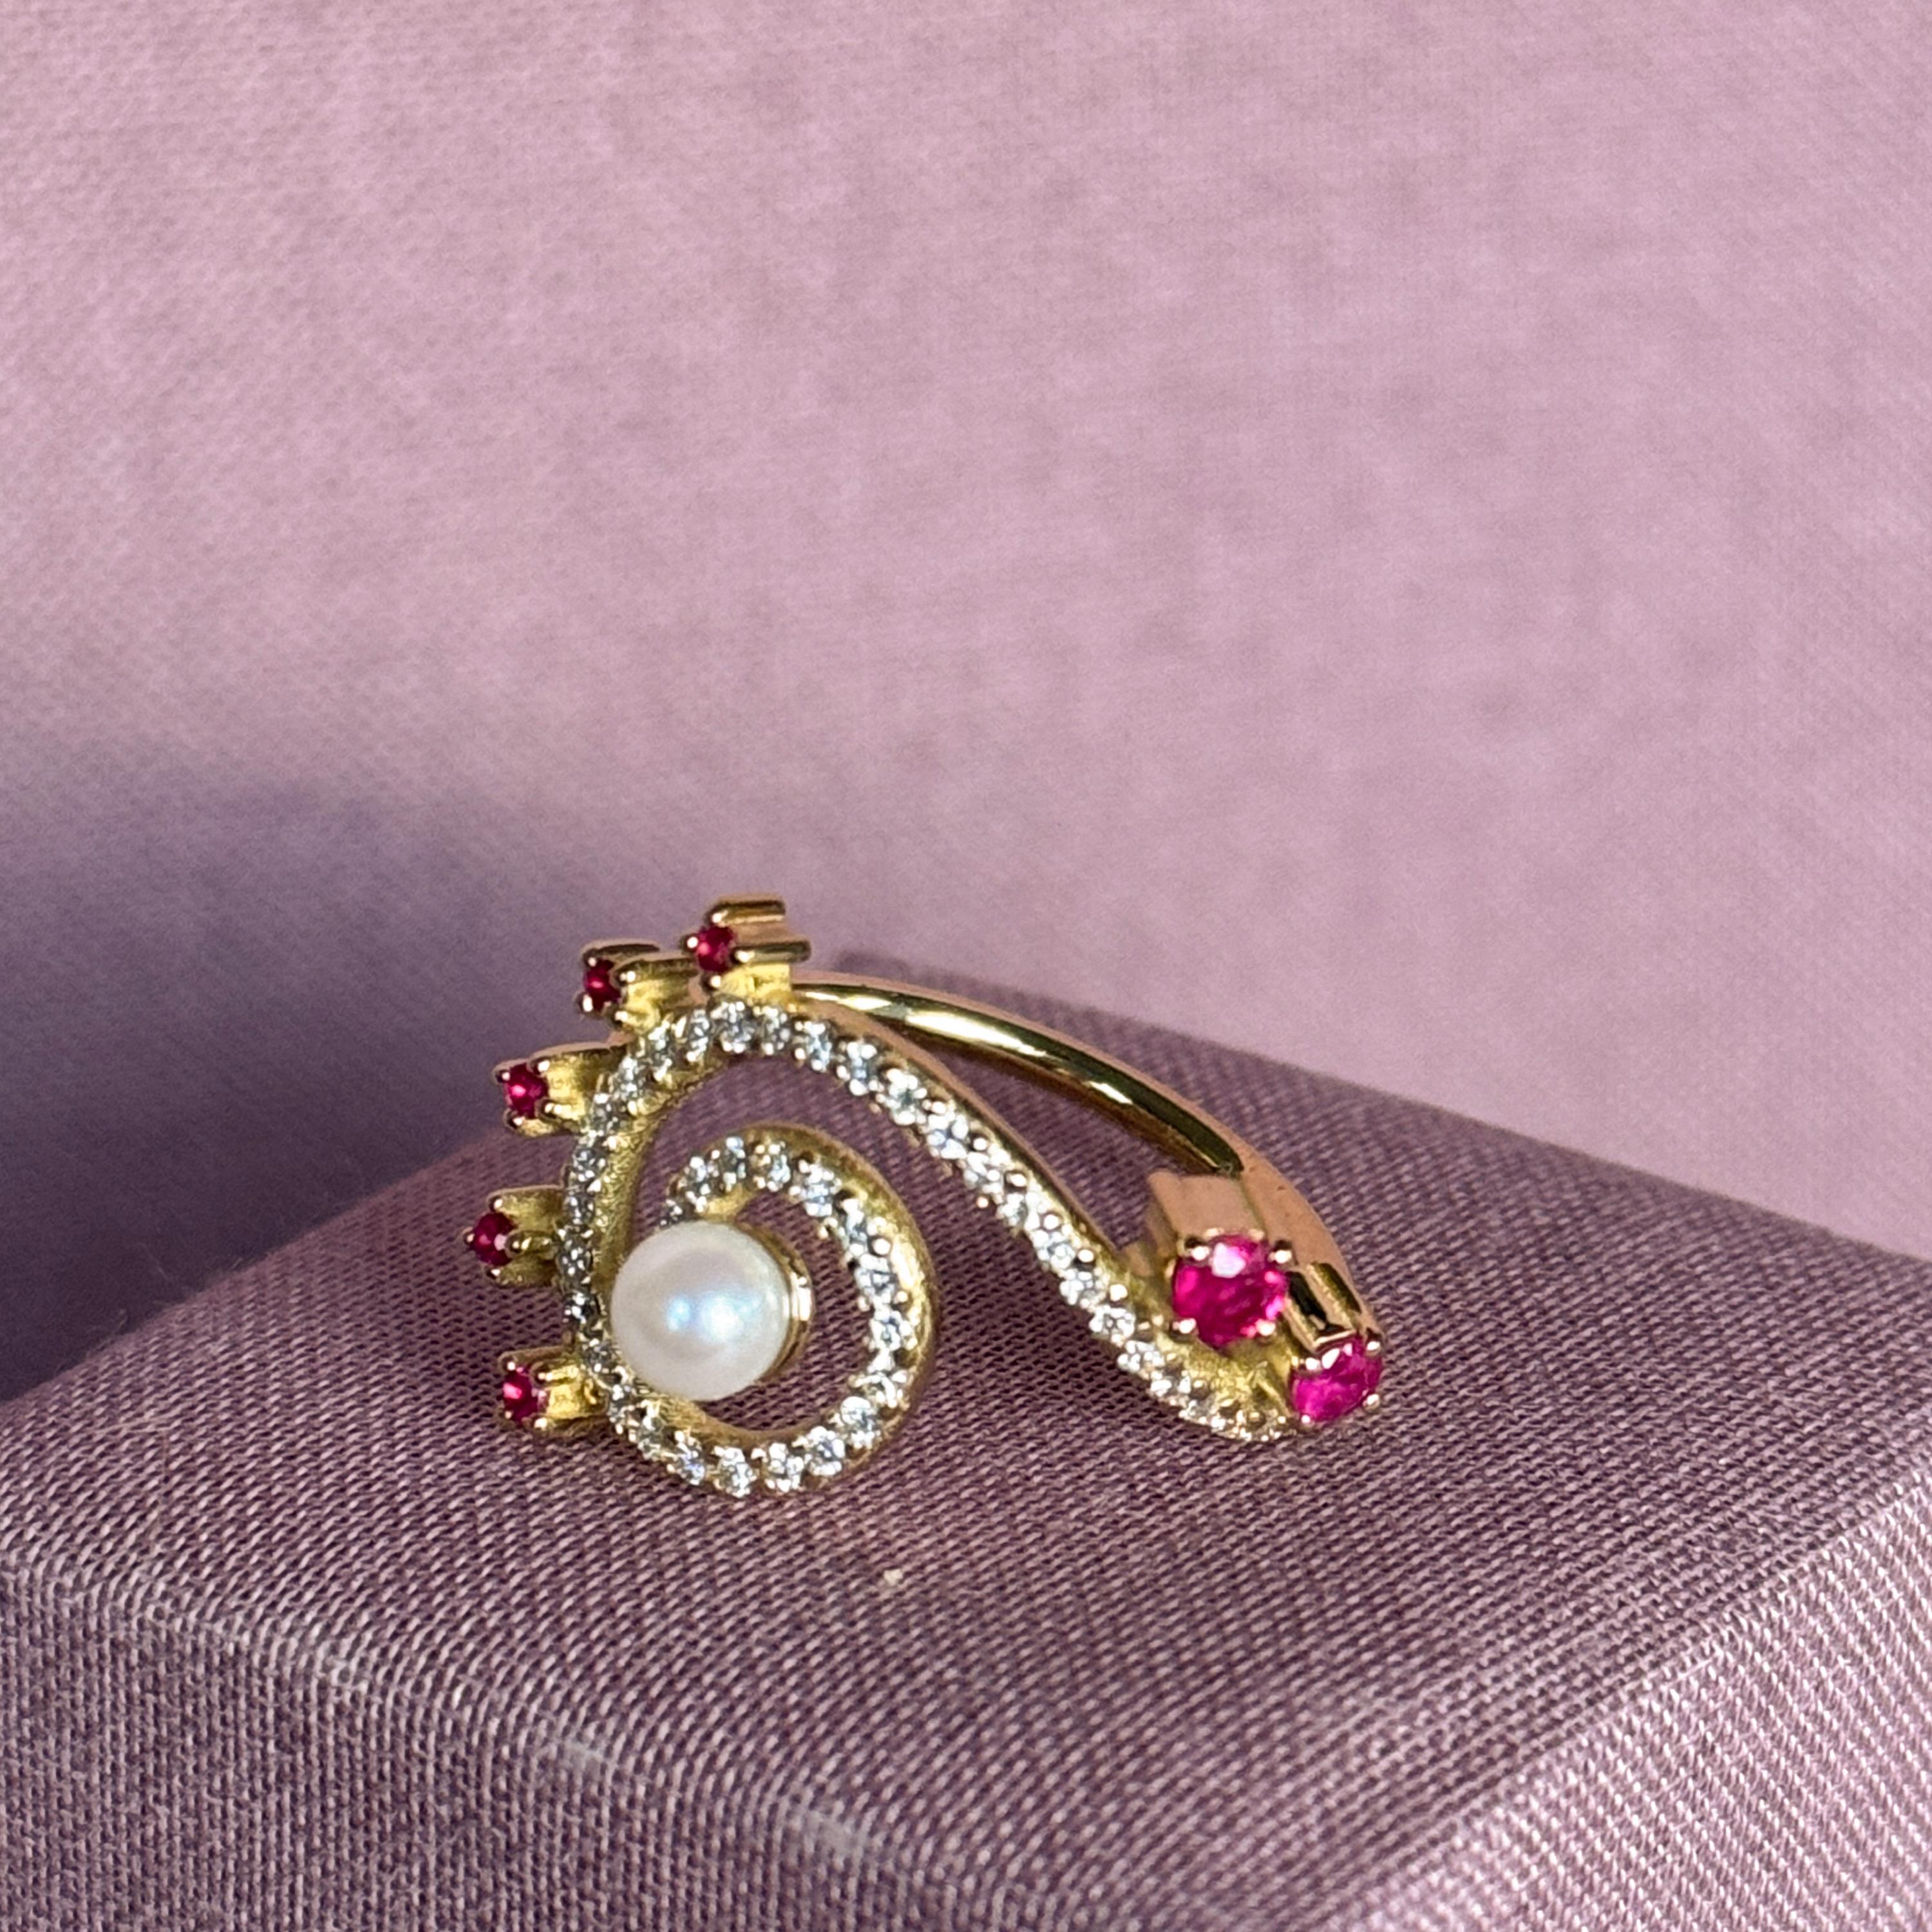 Pear Cut Serenity Index Finger Ring in 18 Karat Gold with Diamonds, Rubies And A Pearl